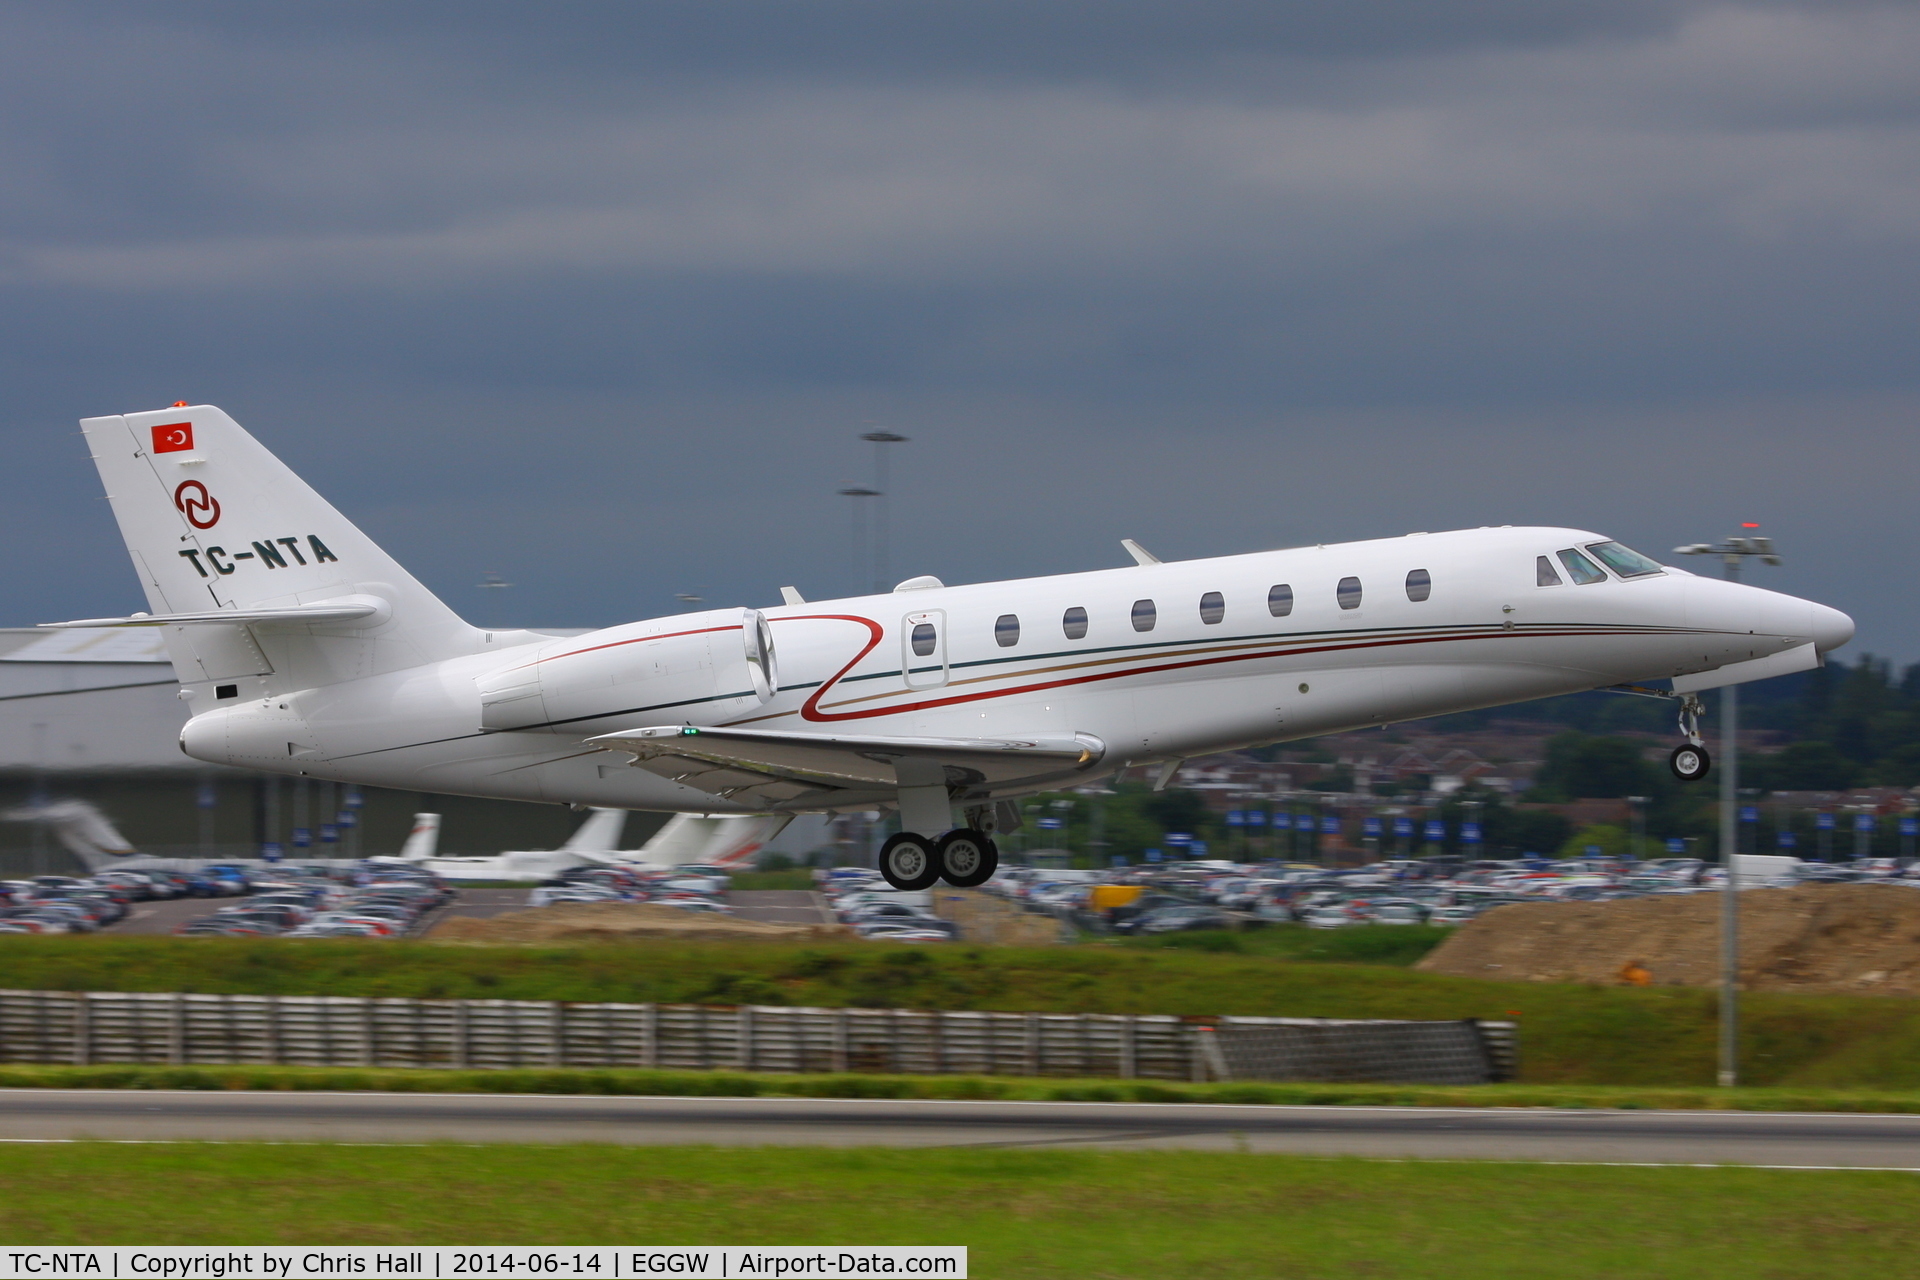 TC-NTA, 2012 Cessna 680 Citation Sovereign C/N 680-0343, privately owned